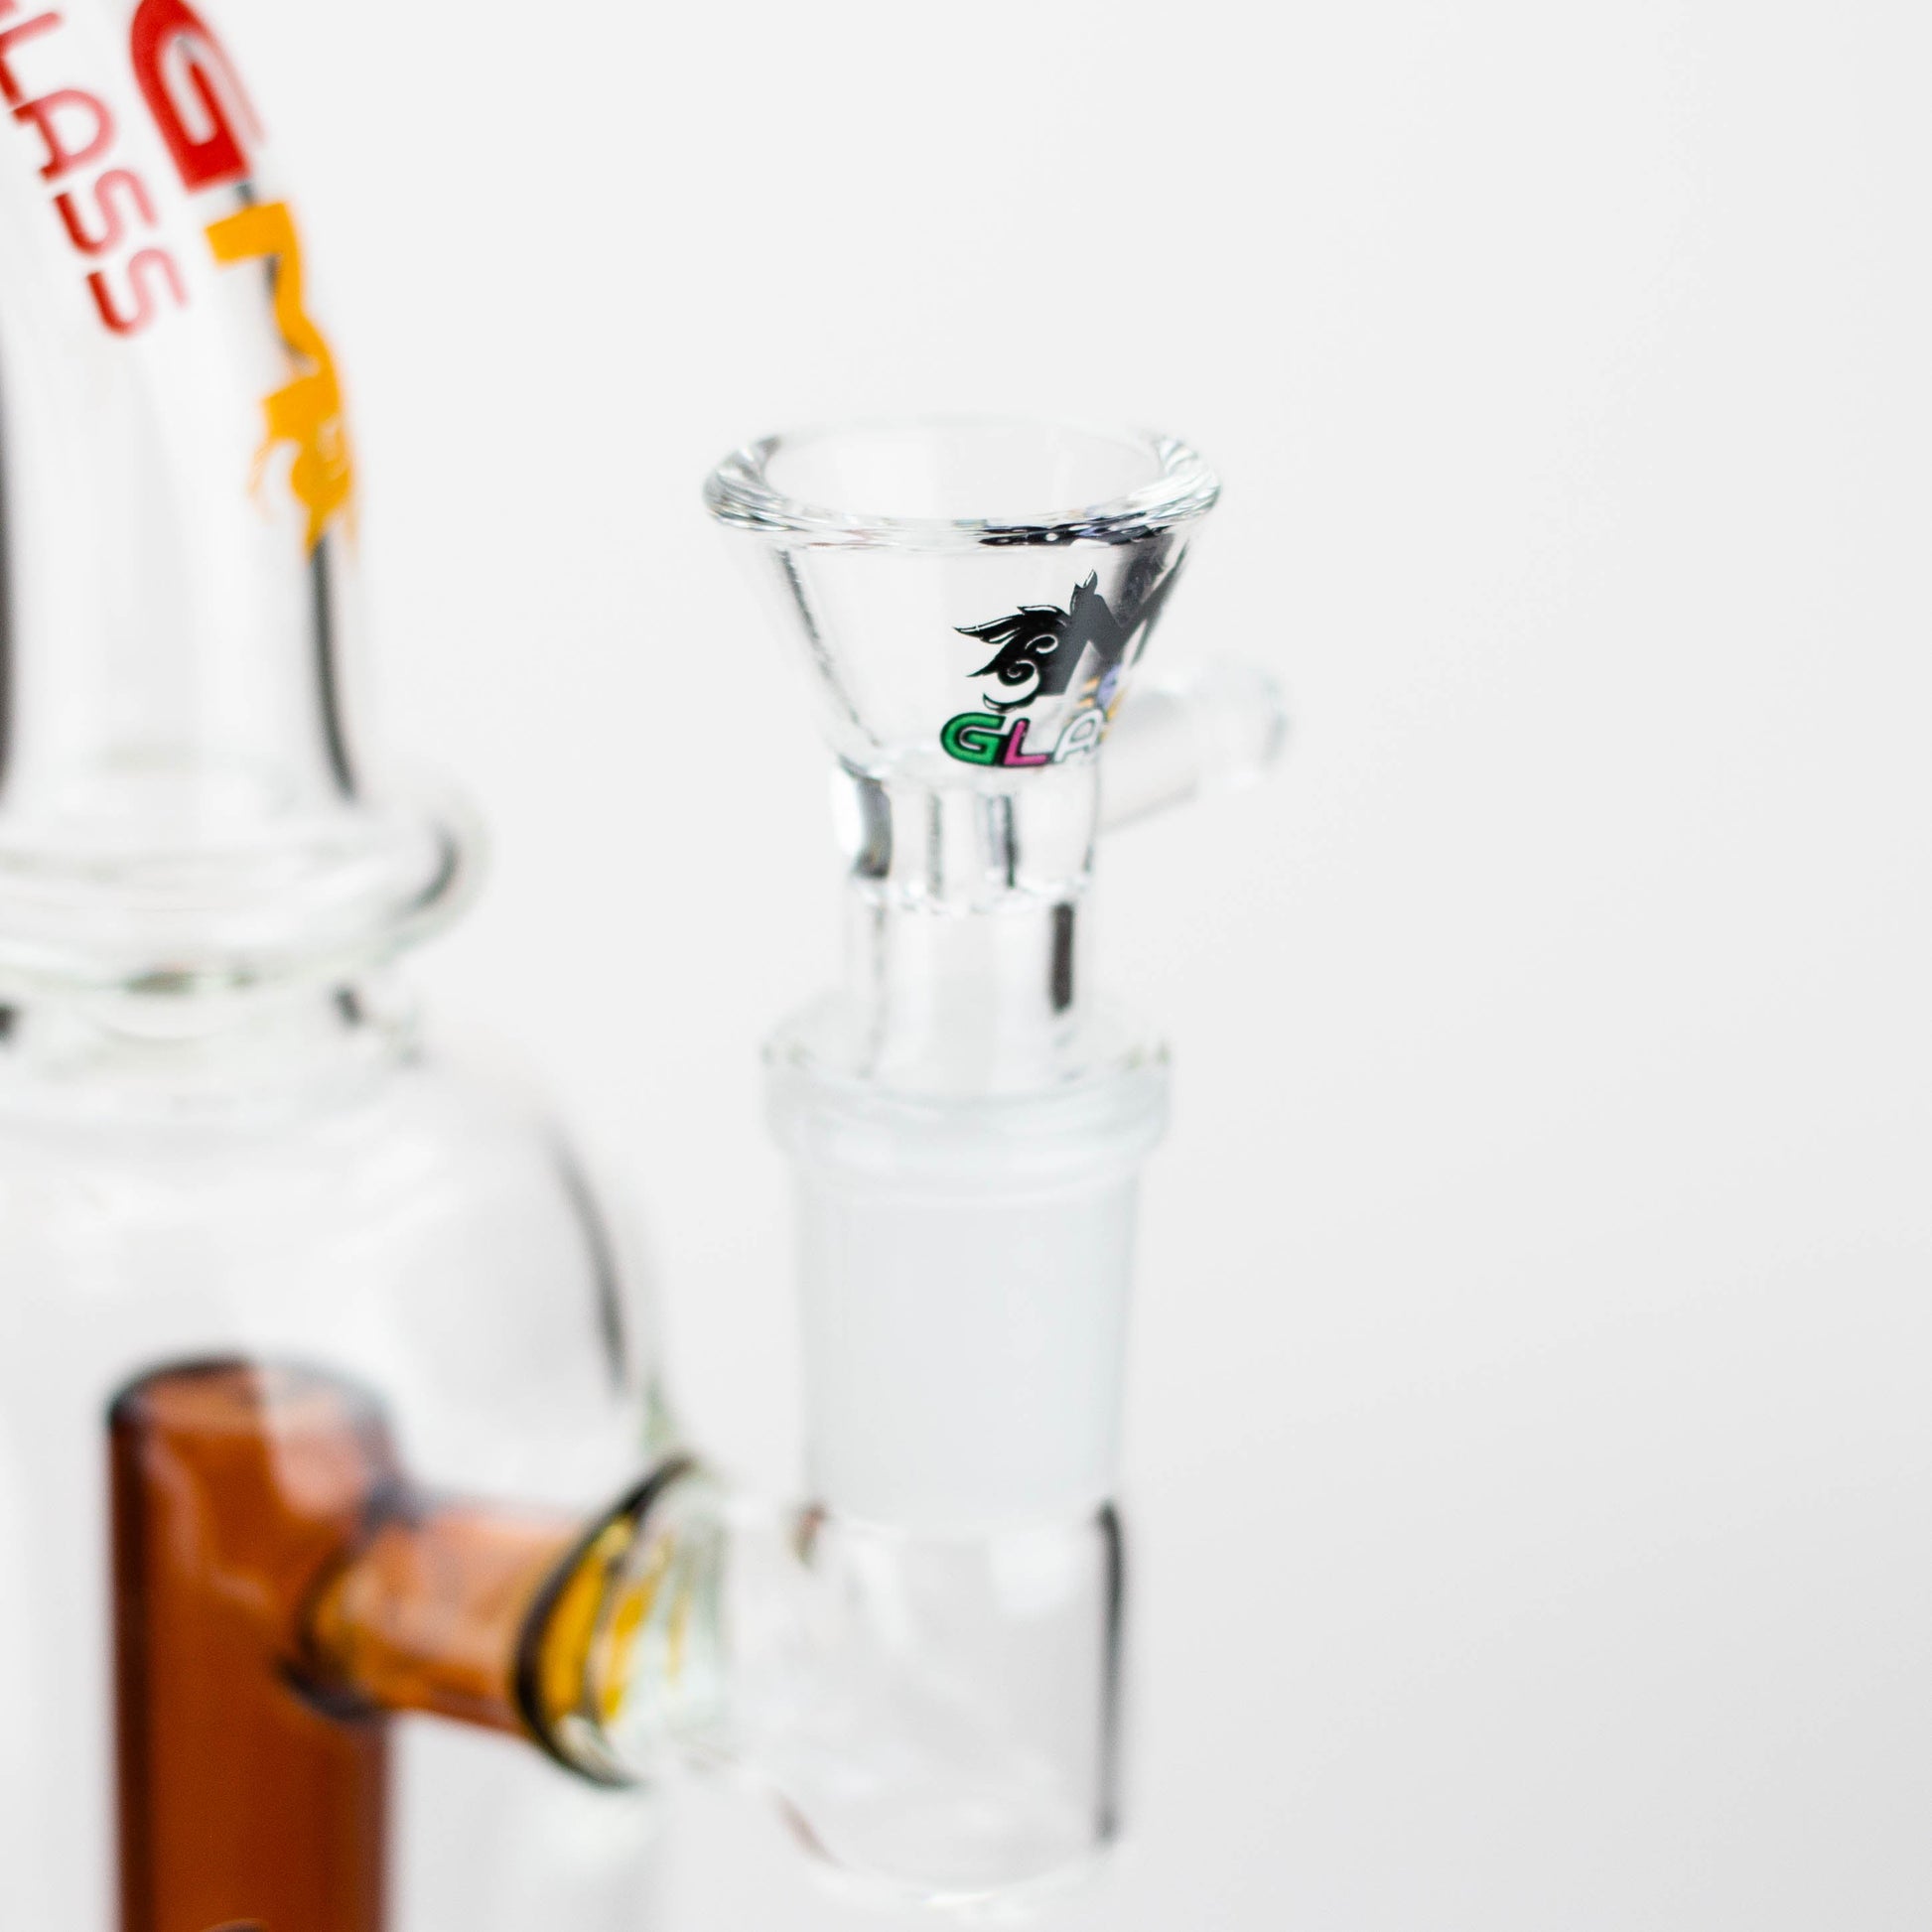 5.7" MGM Glass 2-in-1 bubbler with graphic [C2677]_4